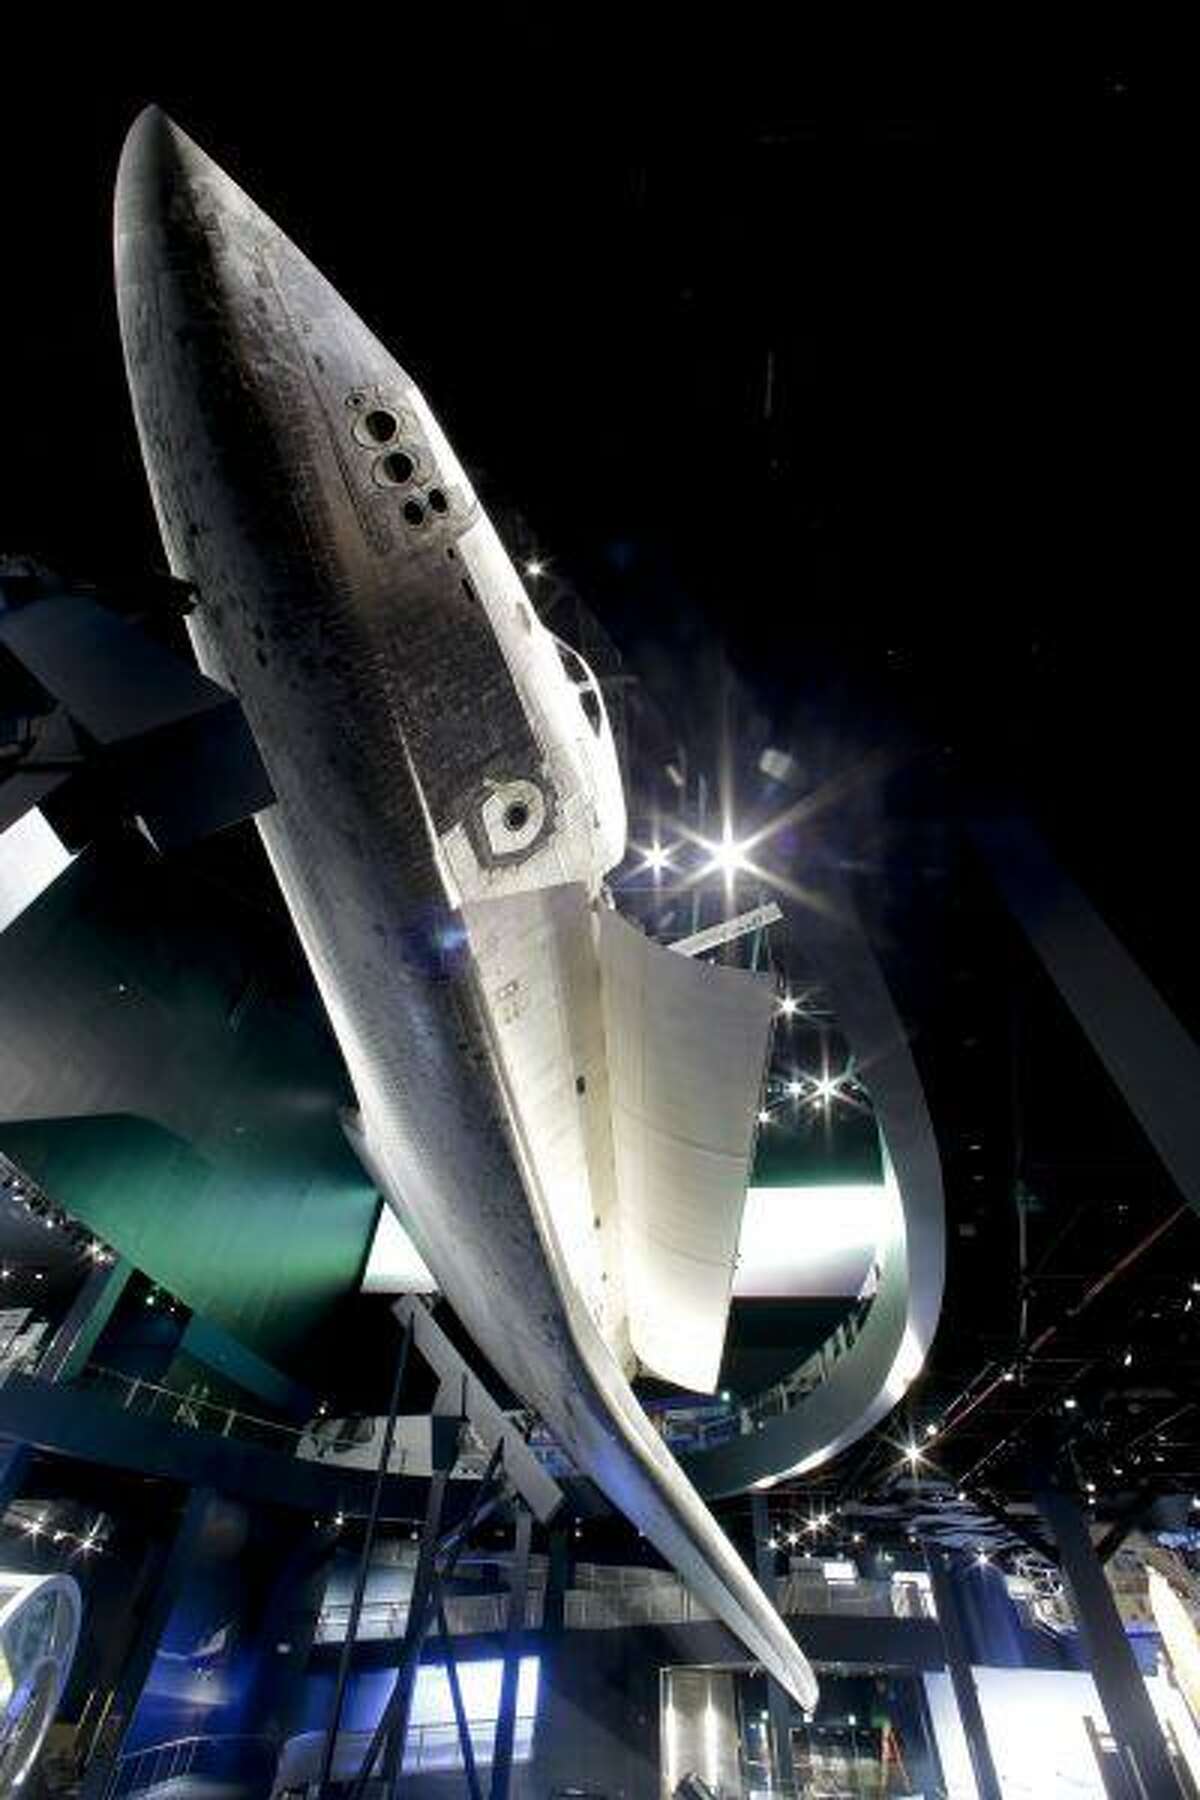 This June 20, 2013 photo shows the space shuttle Atlantis on display at the Kennedy Space Center Visitor Complex in Cape Canaveral, Fla. The 900,000 square-foot facility centering around the last shuttle to go into orbit will open to the public June 29. (AP Photo/John Raoux)